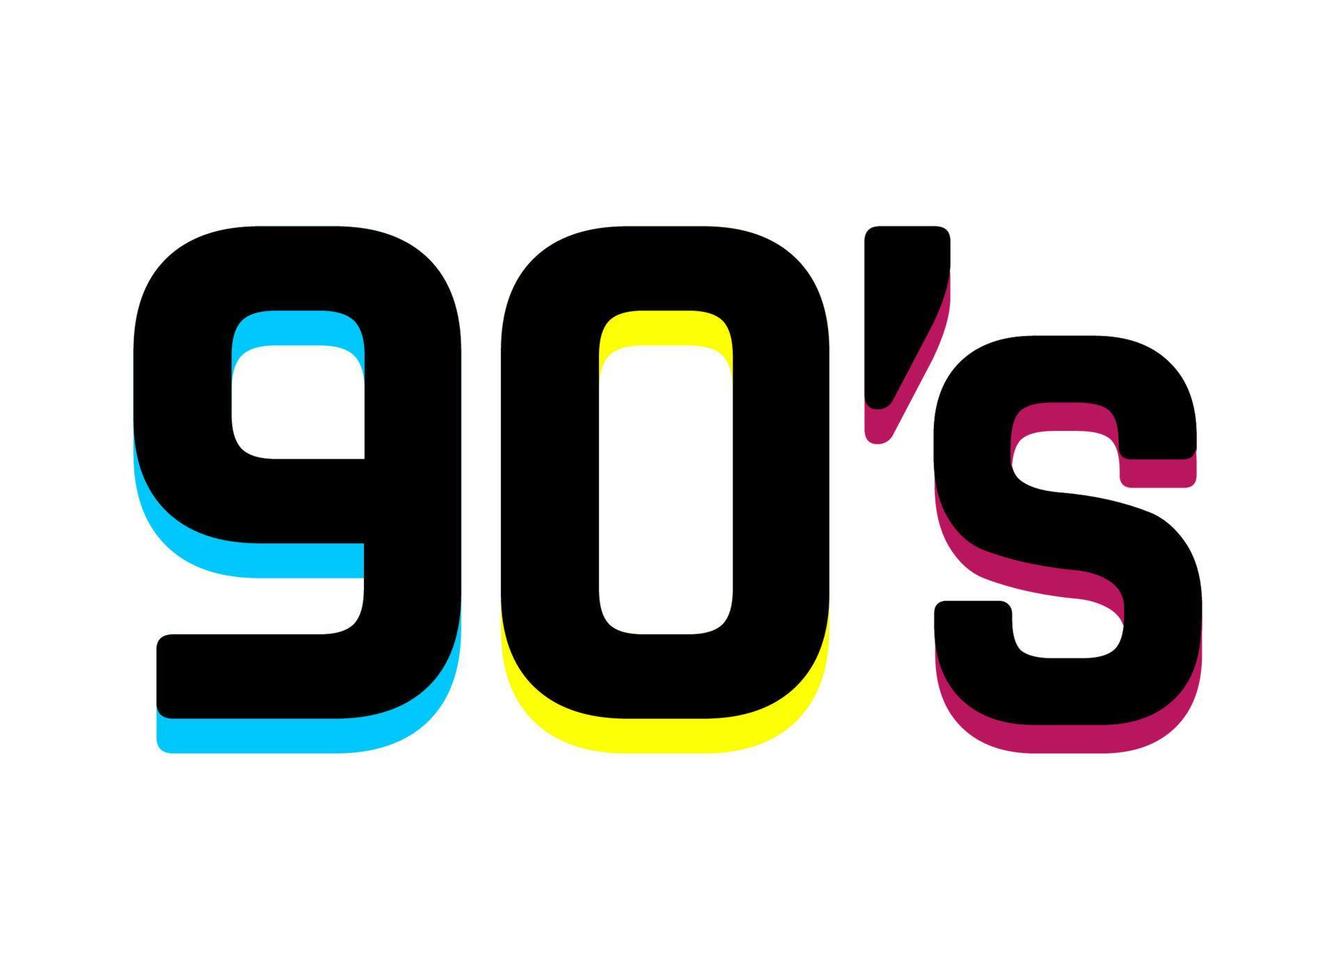 90s with neon shadow vector